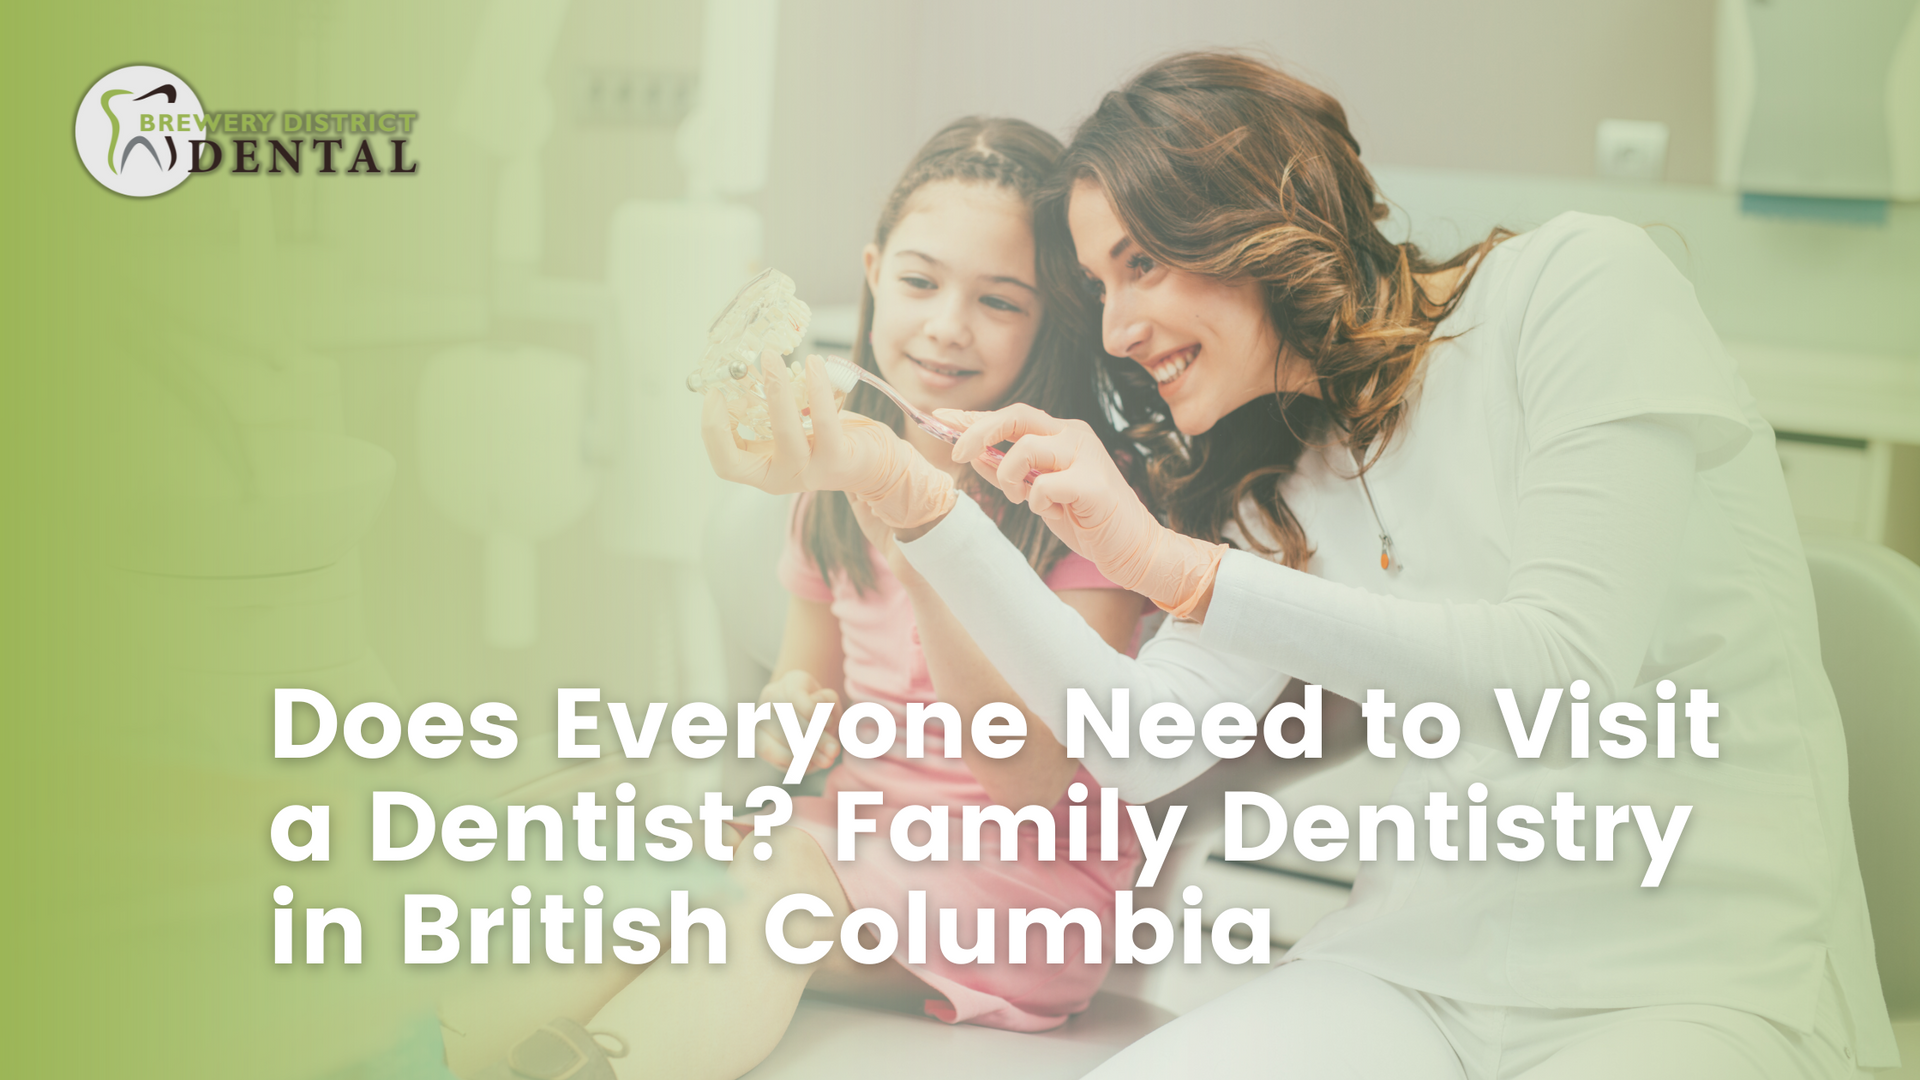 Does everyone need to visit a dentist ? family dentistry in british columbia